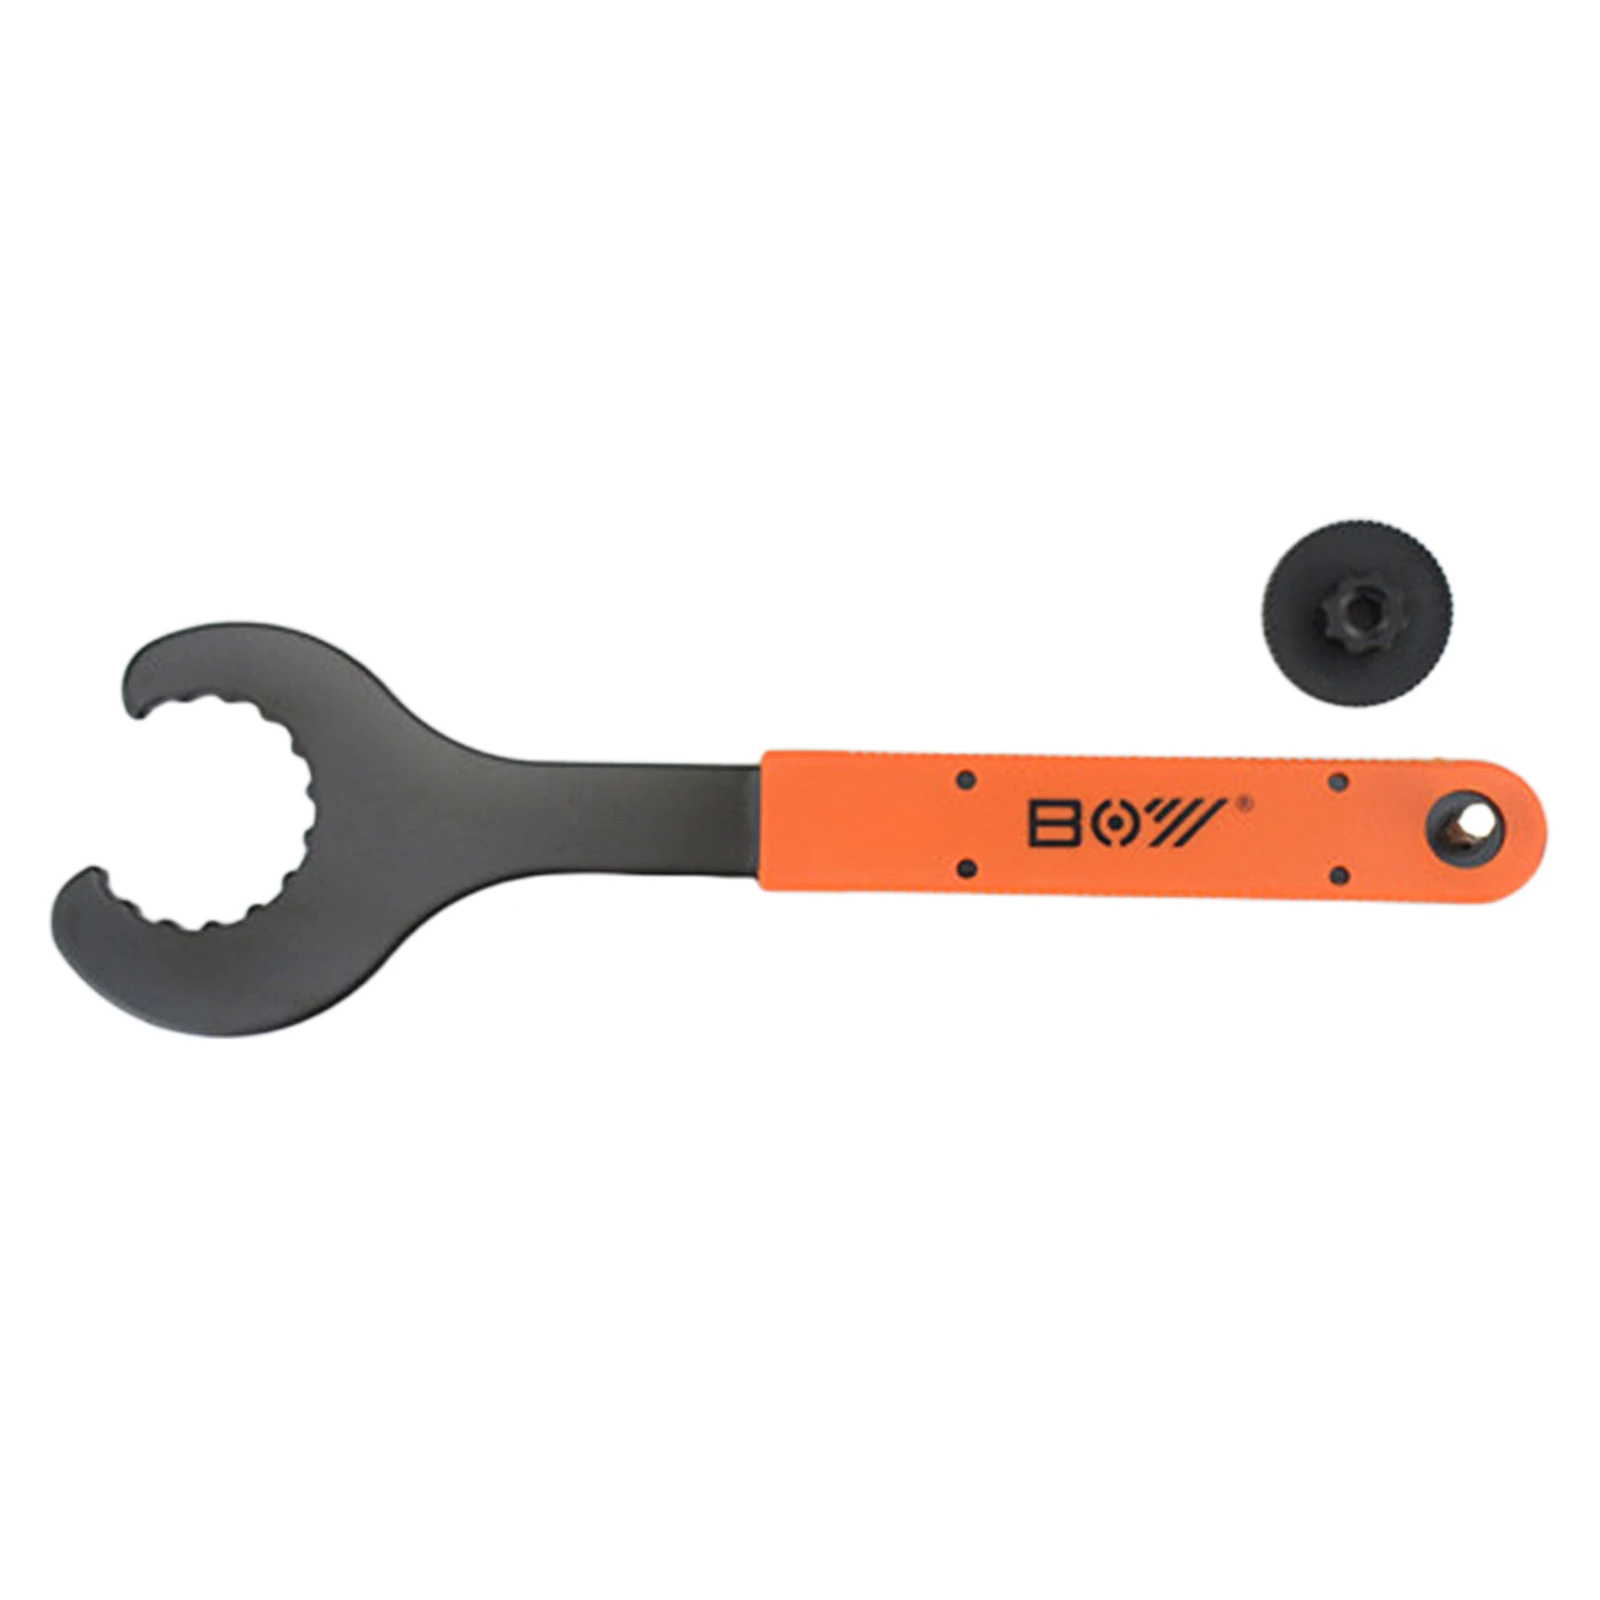 BB Bottom Bracket Wrench Bicycle Crank Wrench Carbon Steel Bottom Wrench for Bicycle Repair Install Tool